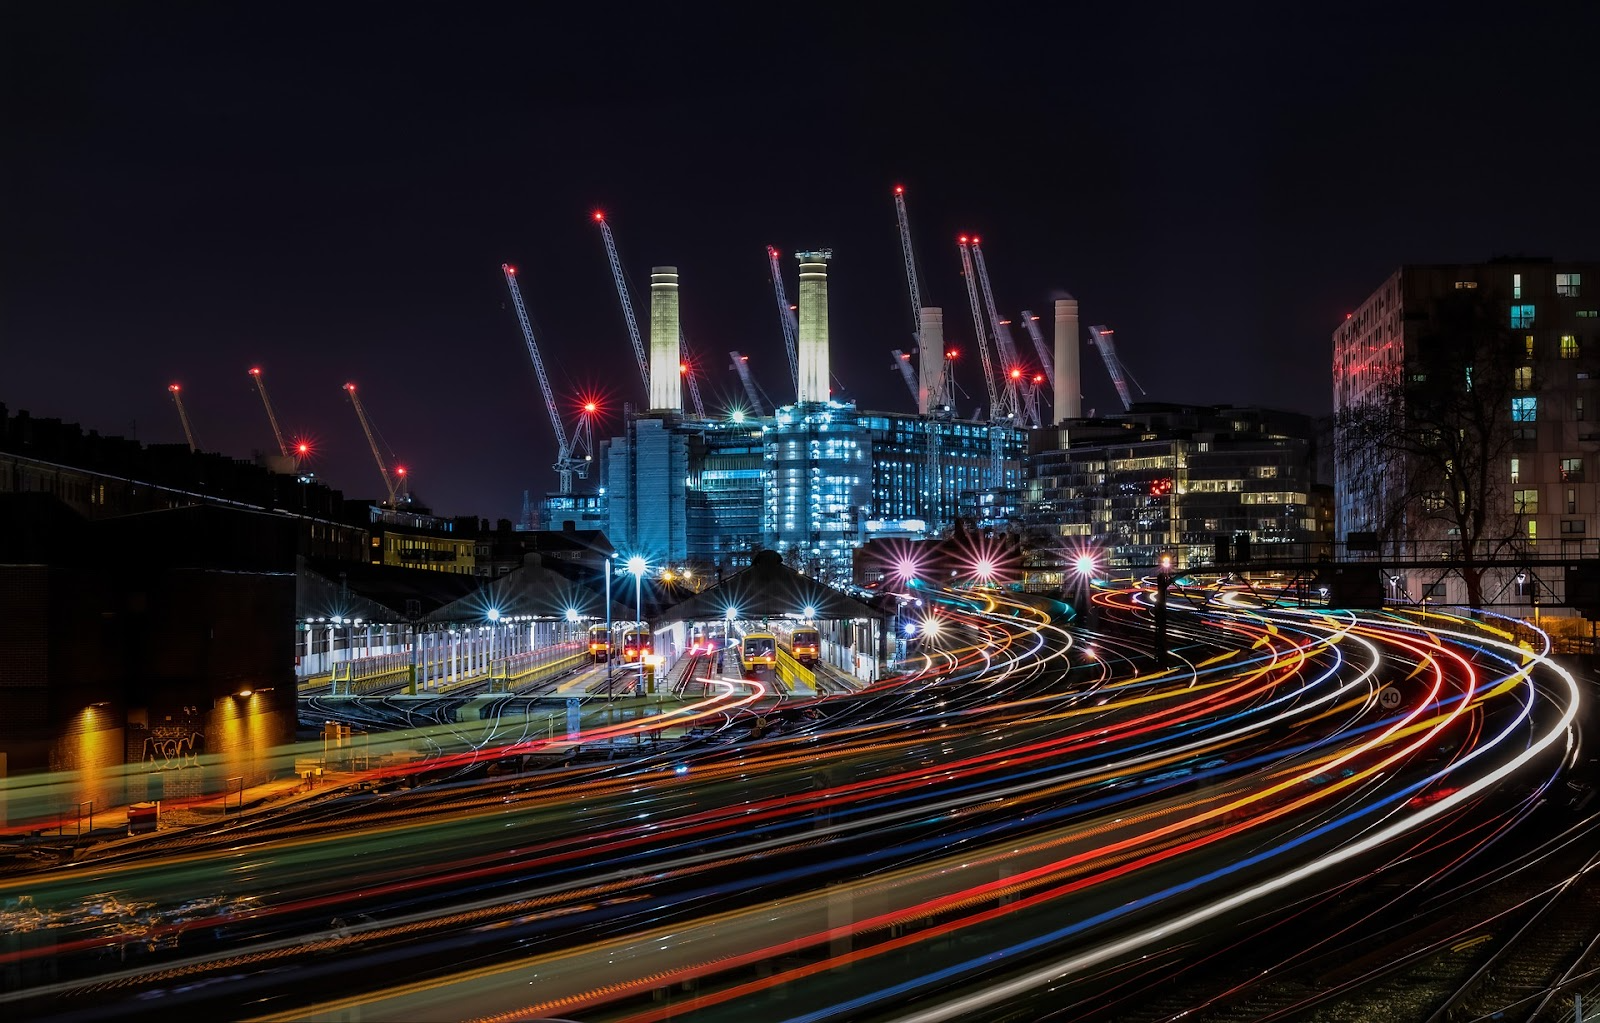 Luminous photo of Battersea Power Station in the distance at night